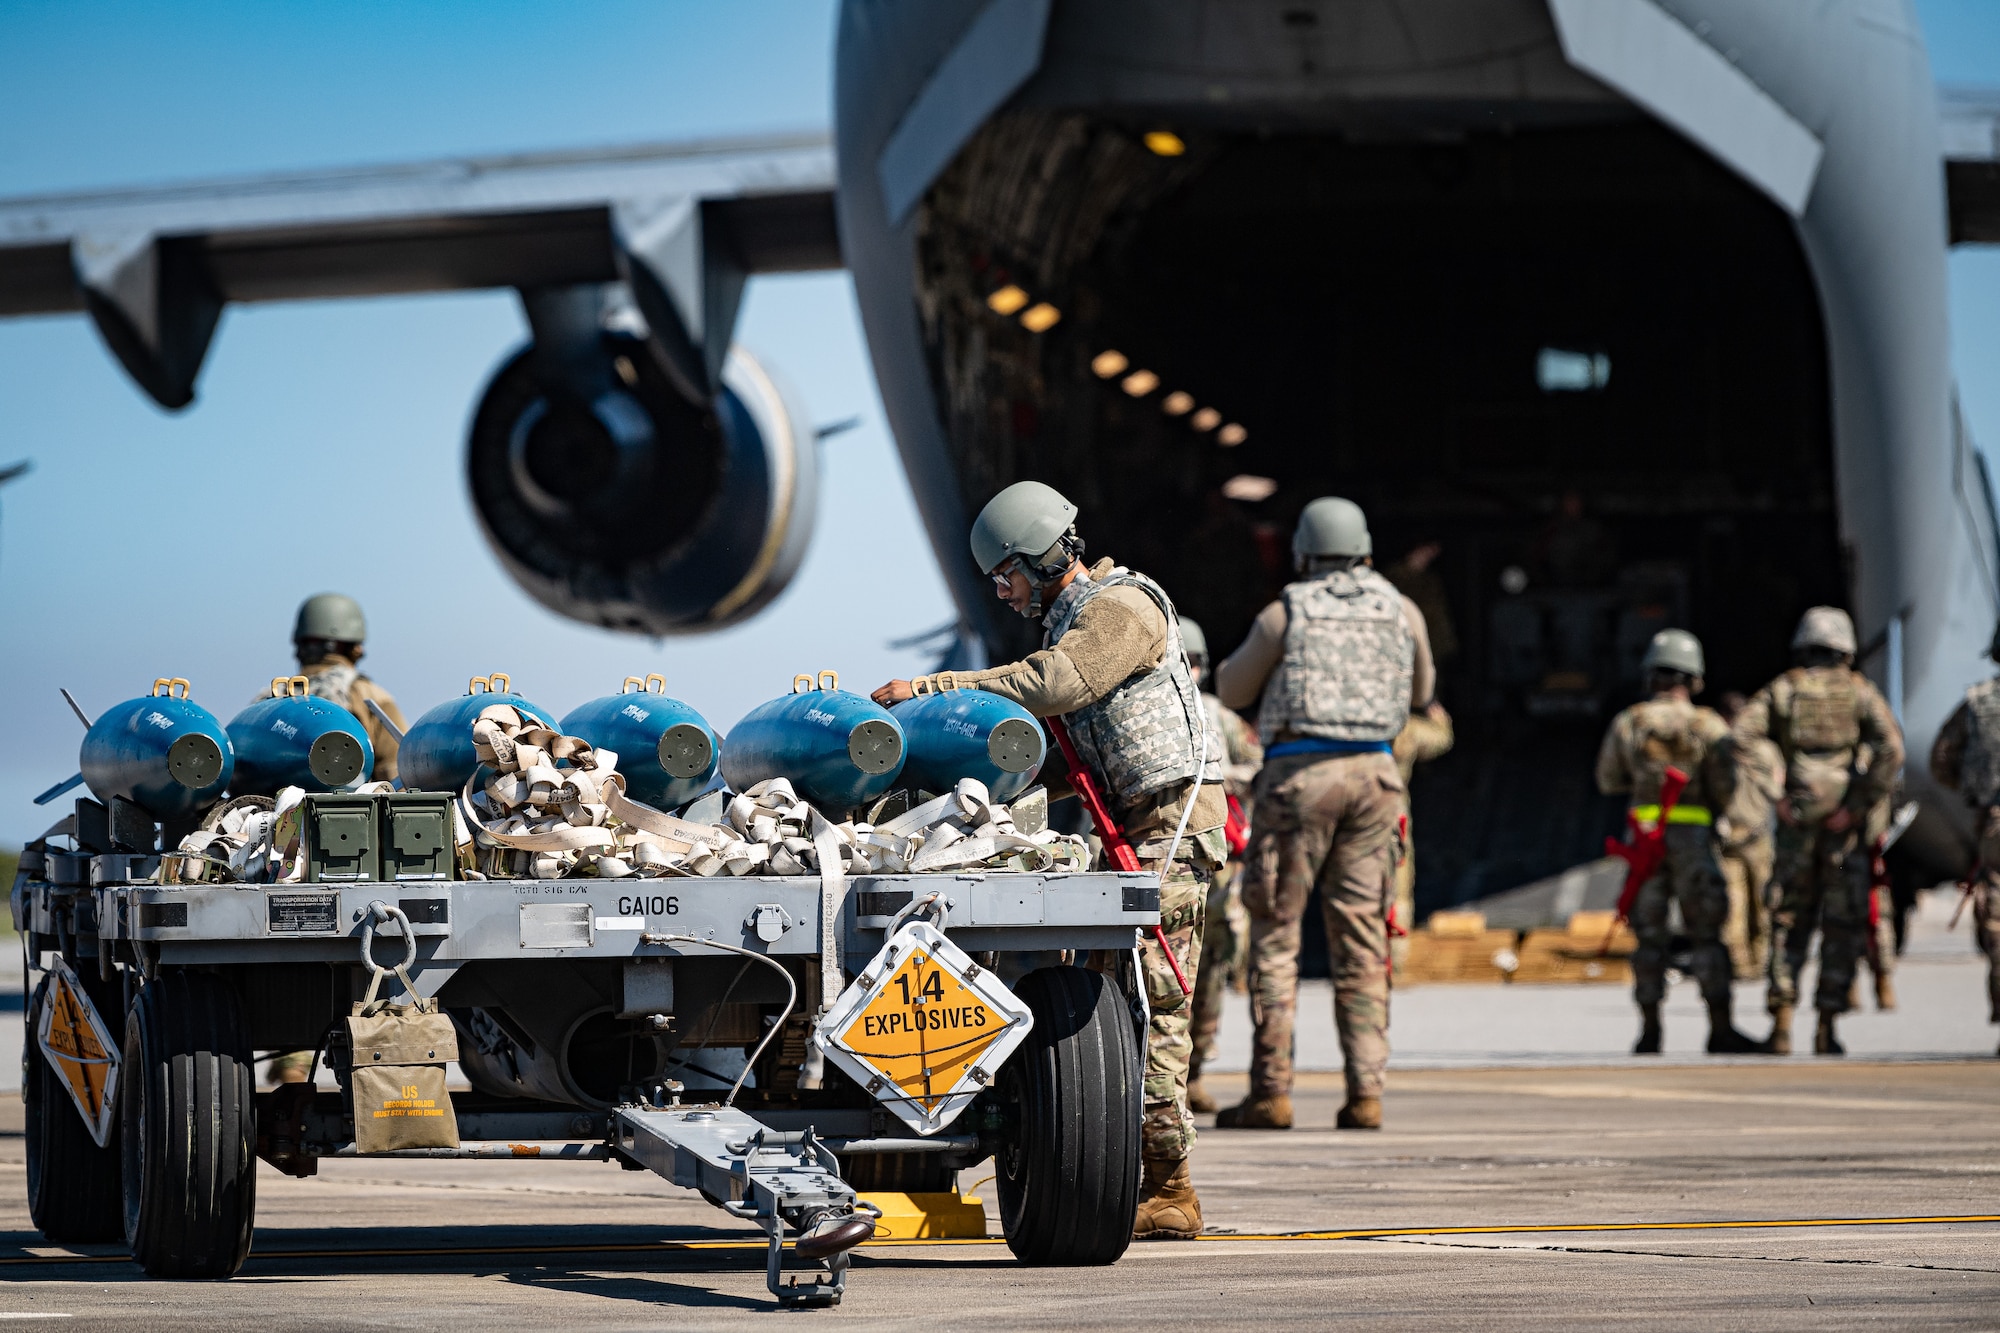 A photo of an Airman evaluating contents of a munitions trailer